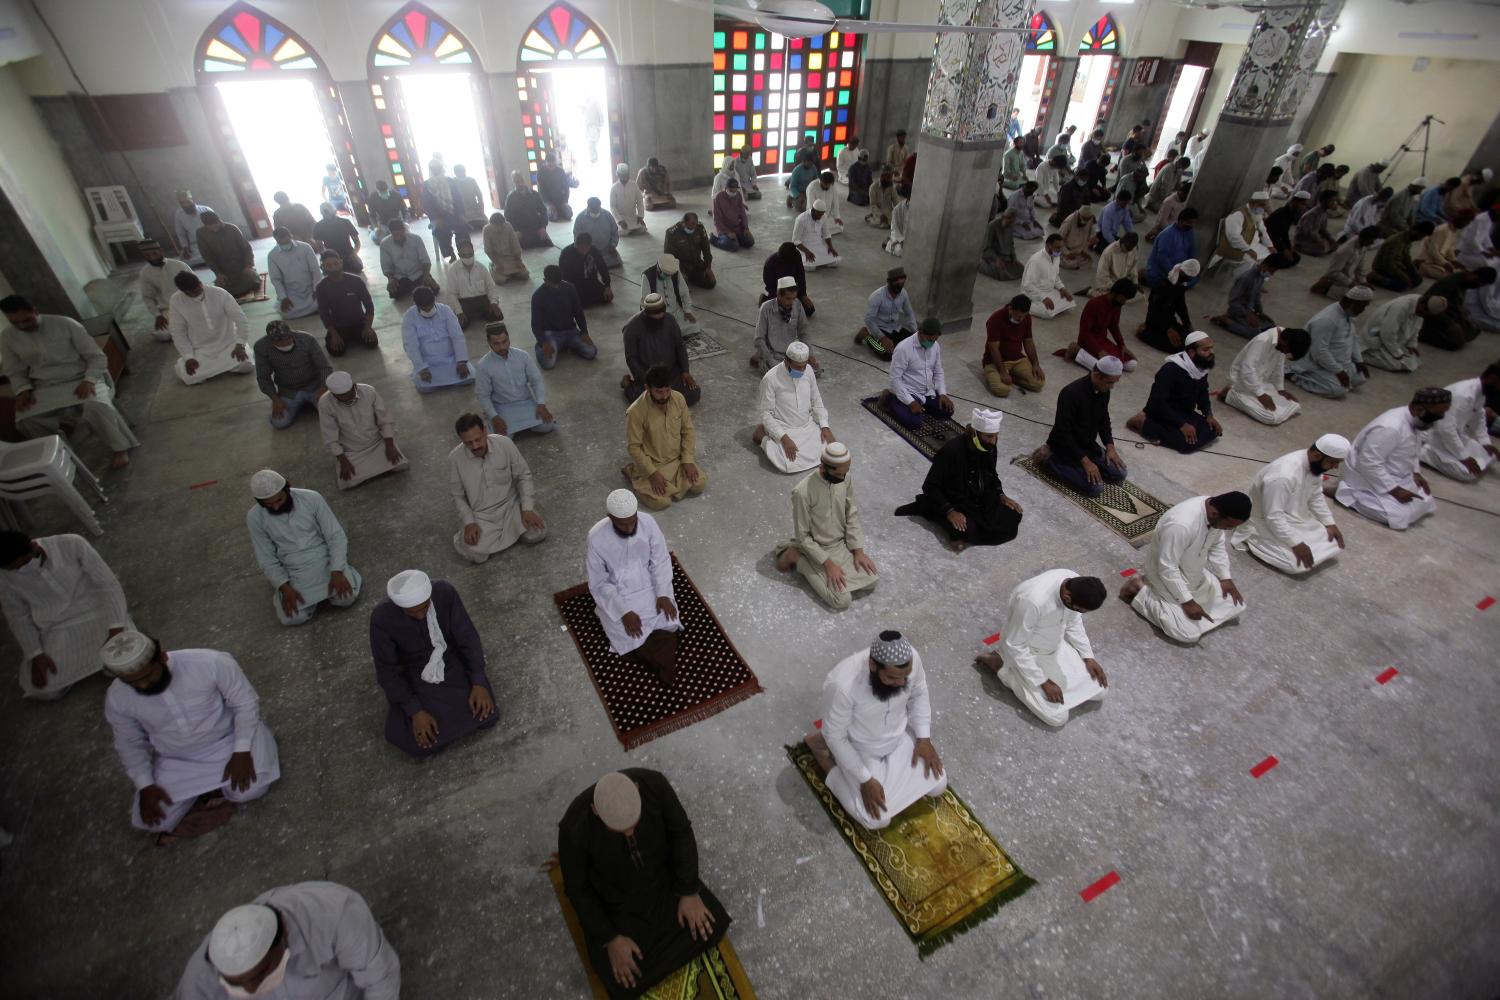 Muslims maintain safe distance as they attend Friday prayer after government limited congregational prayers and ordered to stay home, in efforts to stem the spread of the coronavirus disease (COVID-19), in Lahore, Pakistan April 24, 2020. REUTERS/Mohsin Raza